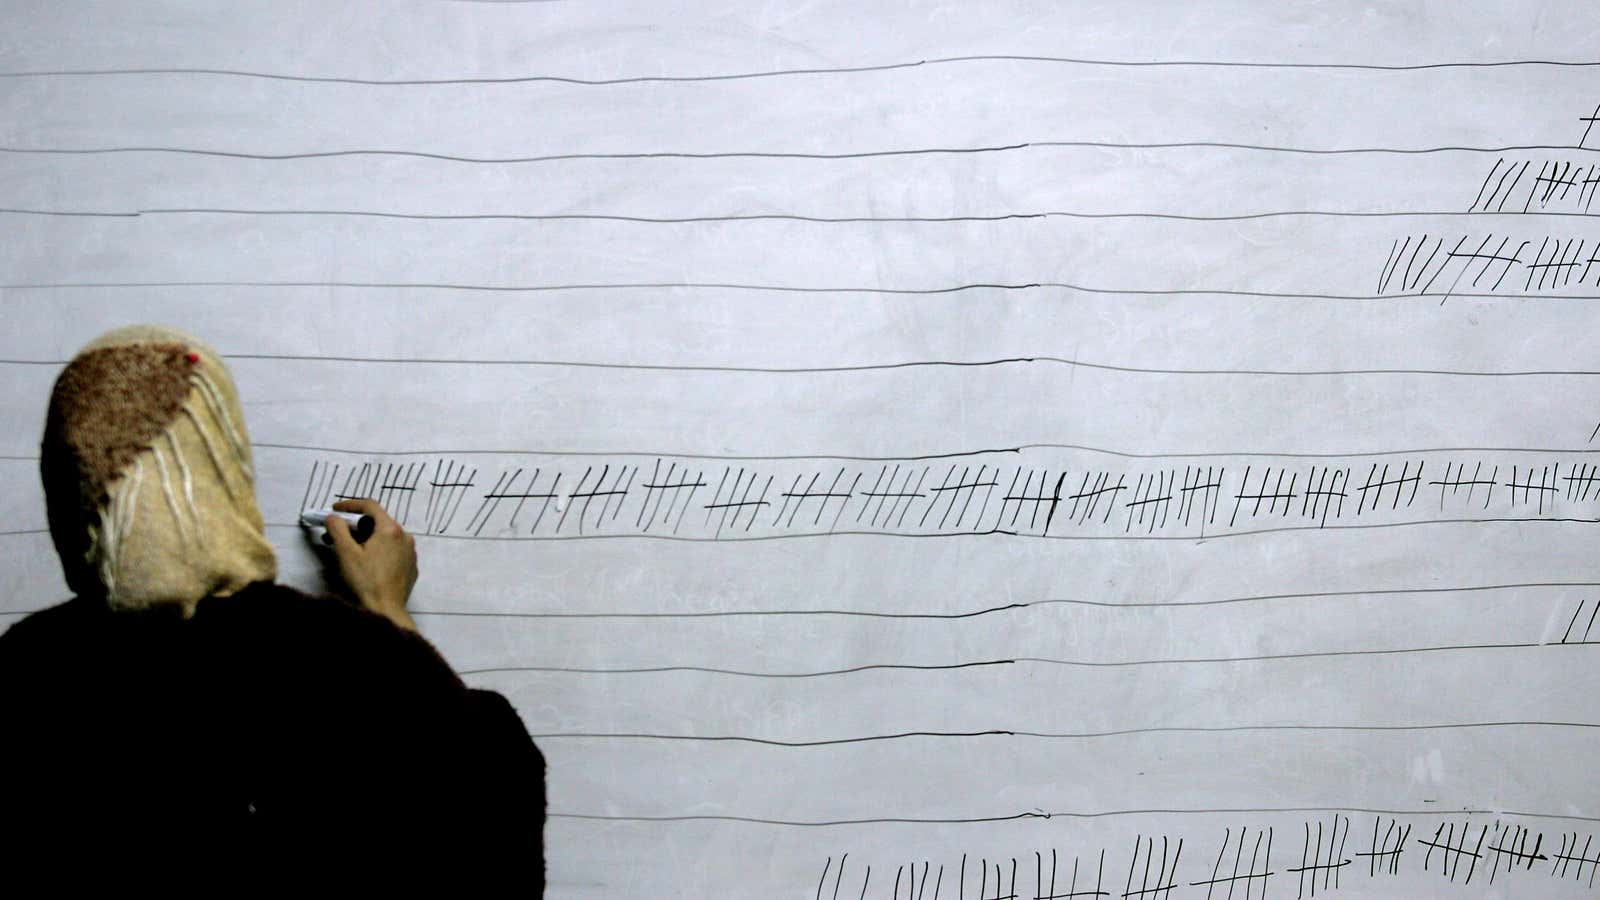 A Palestinian election worker counts votes on a board at a polling station in the West Bank city of Ramallah January 25, 2006. No party is likely to win a majority of seats in the new Palestinian parliament, making it theoretically possible that Hamas could form the next government, a leading pollster said on Wednesday. REUTERS/Stoyan Nenov – RP3DSFDRPIAC